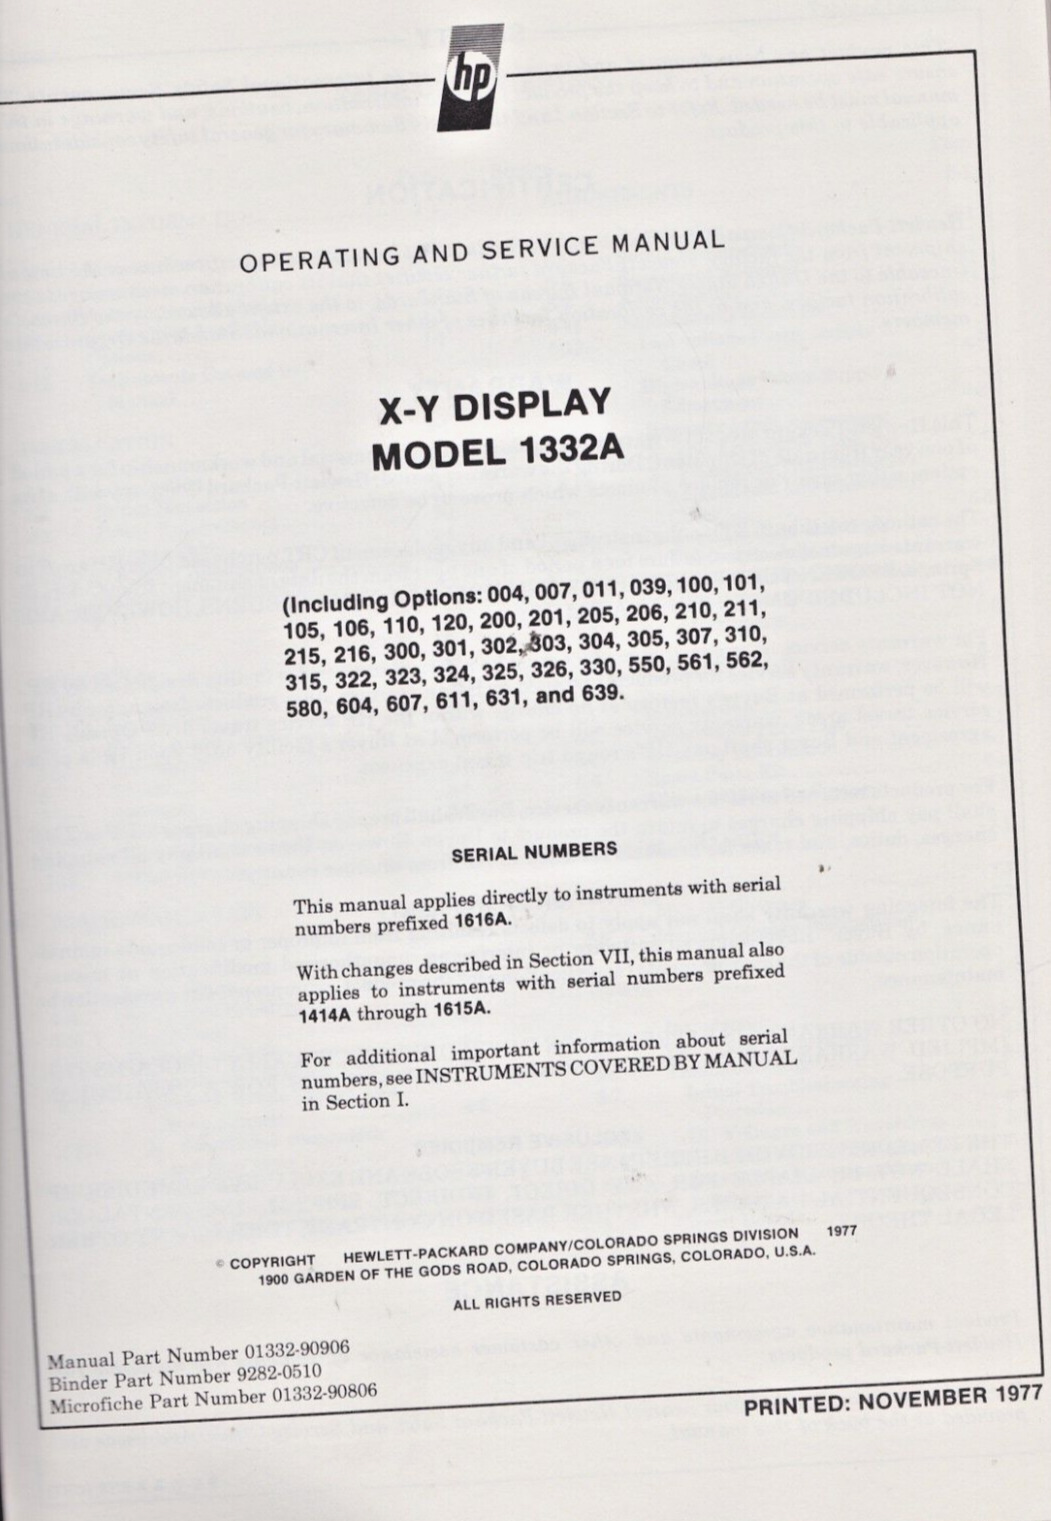 HP X-Y Display Model 1332A Operating and Service Manual November 1977 Used